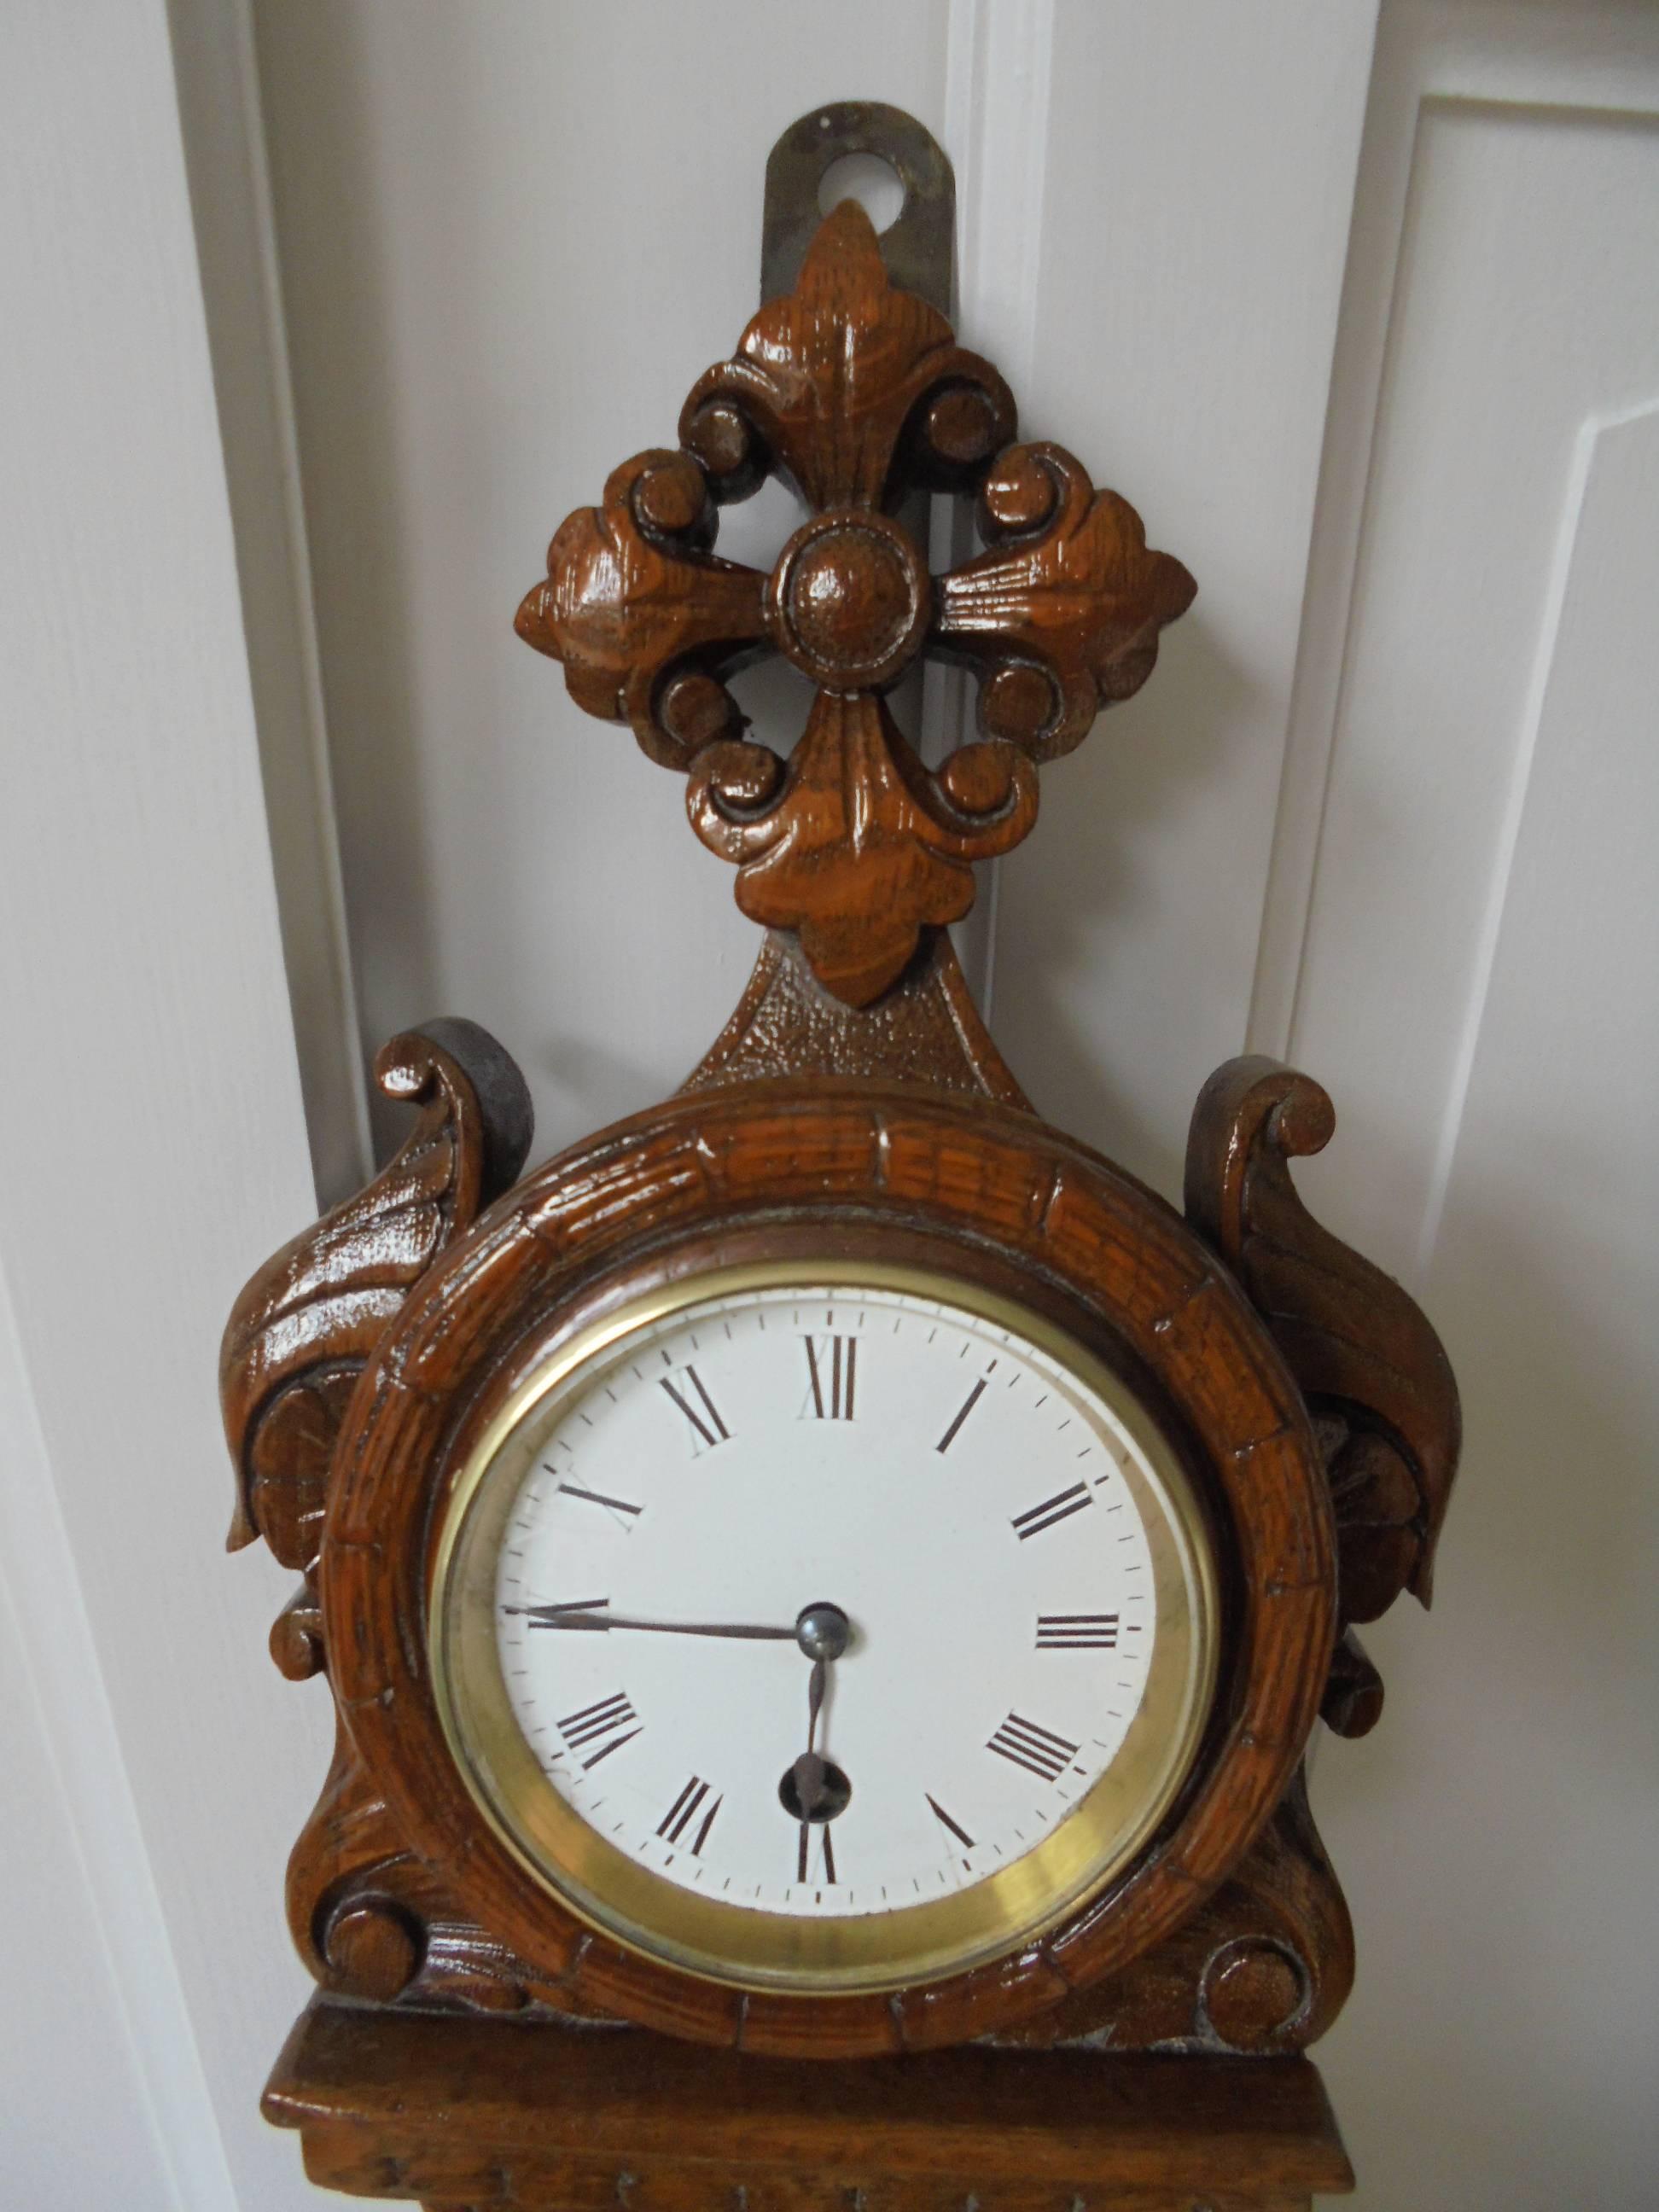 Offered for sale is this oak clock barometer.

Dating from 1900. Heavily carved golden oak case. It has a clock at the top within enamel dial, key hole brass and glass bezel (with key). Cased thermometer, and barometer having brass and glass